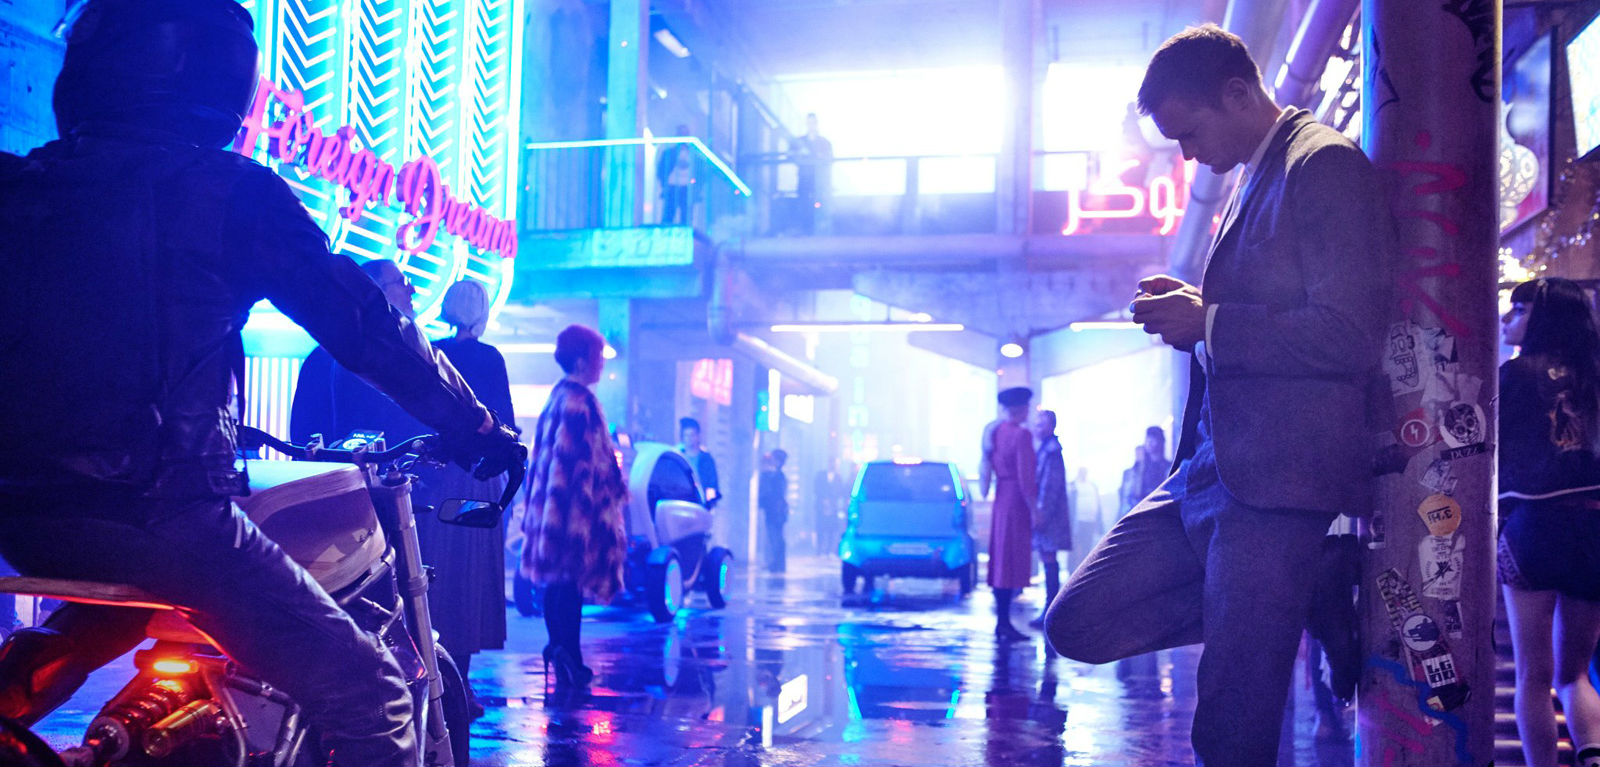 MOVIES: Mute - Review